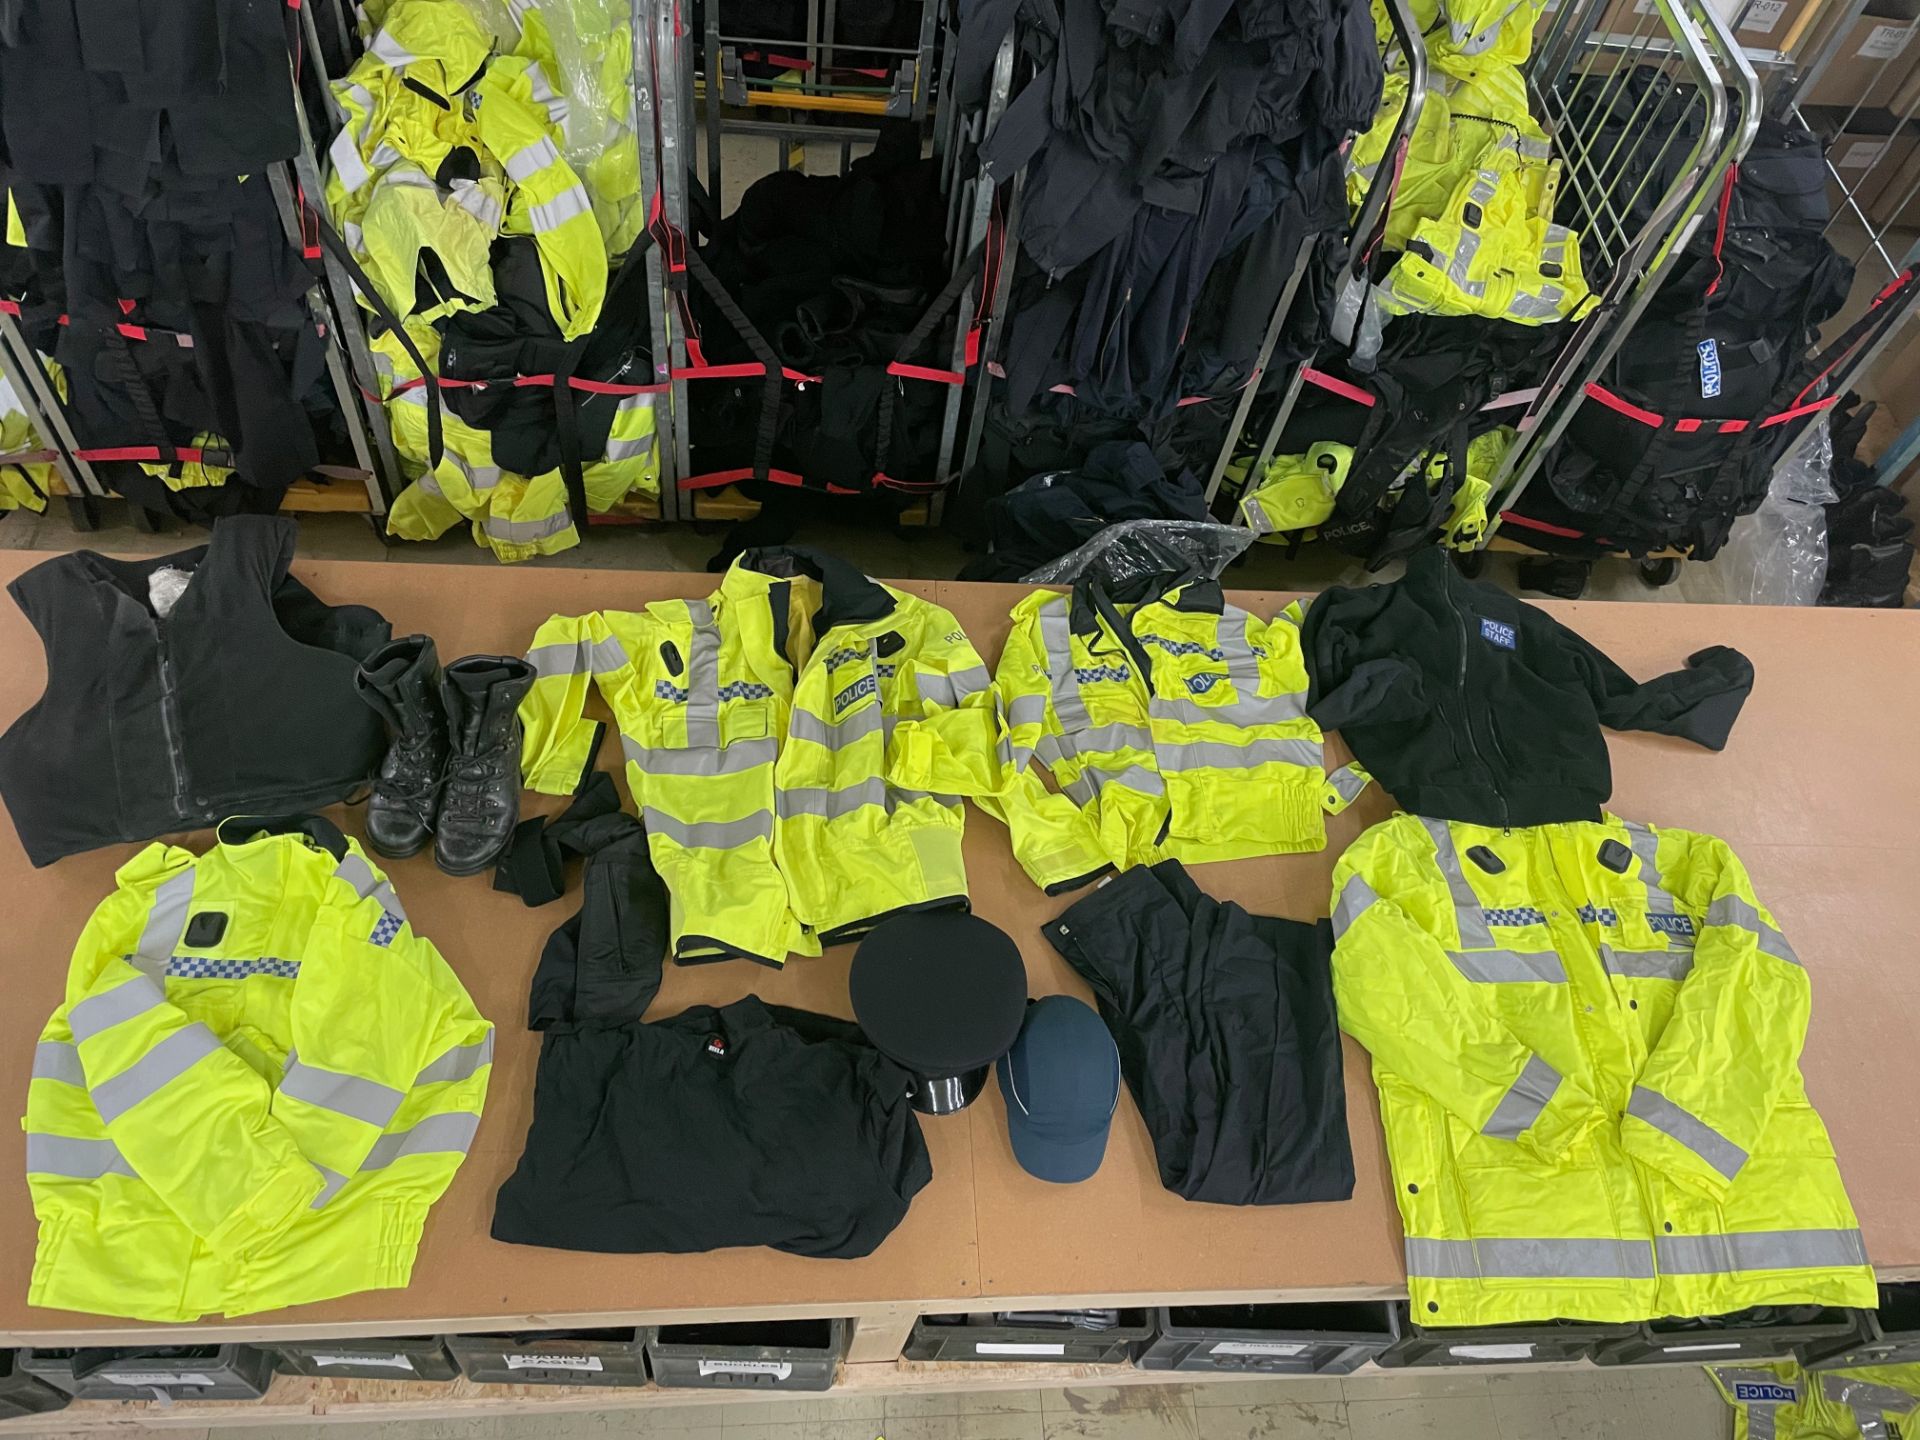 20 X BAGS FULL TO THE BRIM WITH POLICE CLOTHING & ACCESSORIES - RRP £5500.00 - NO VAT ON HAMMER - Image 6 of 12